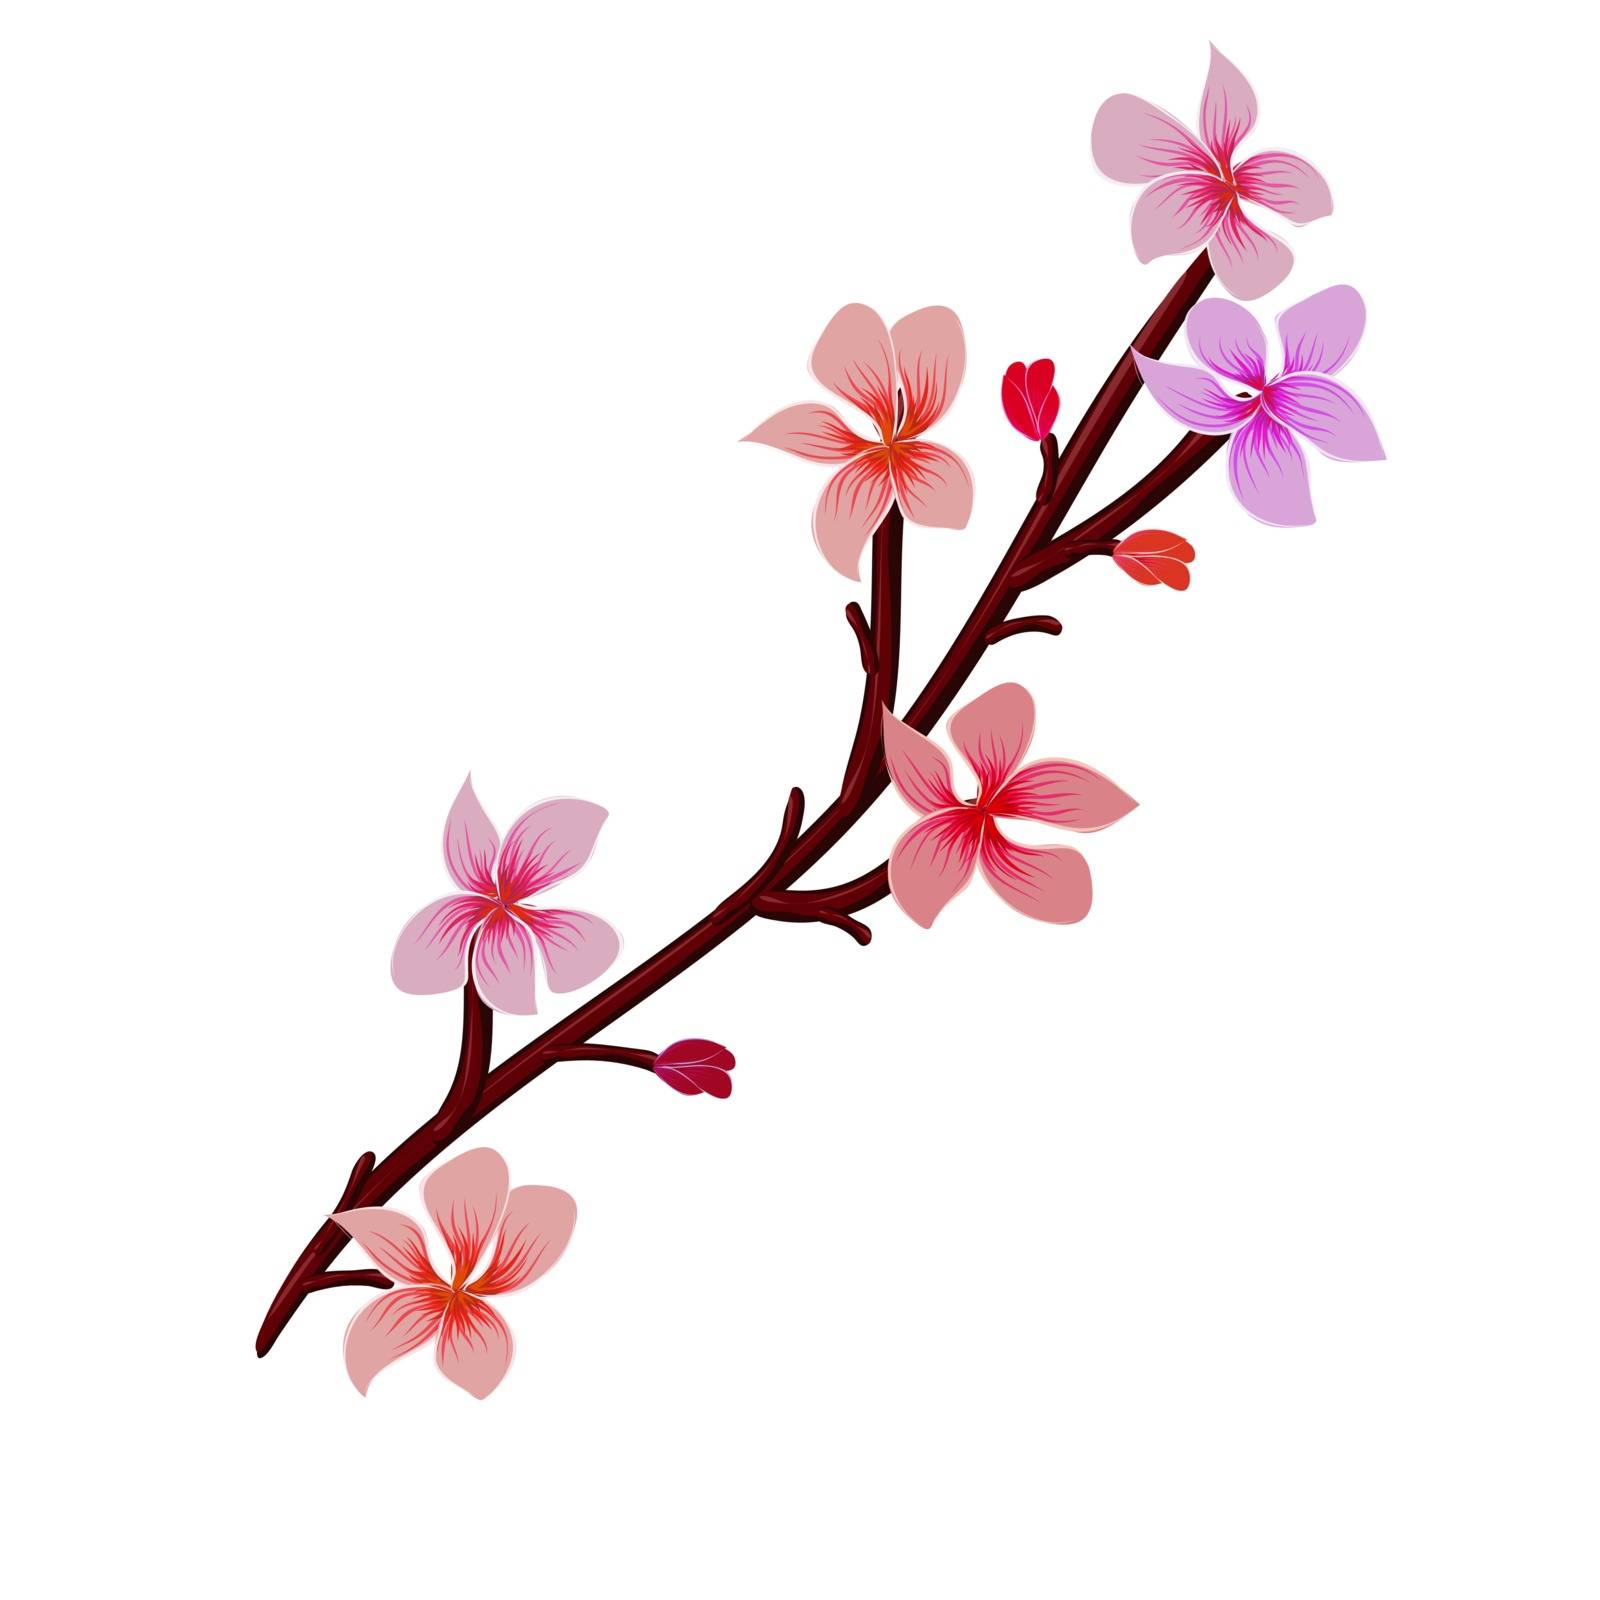 Background with floral pattern with blooming flowers. Vector illustration without gradients and transparency